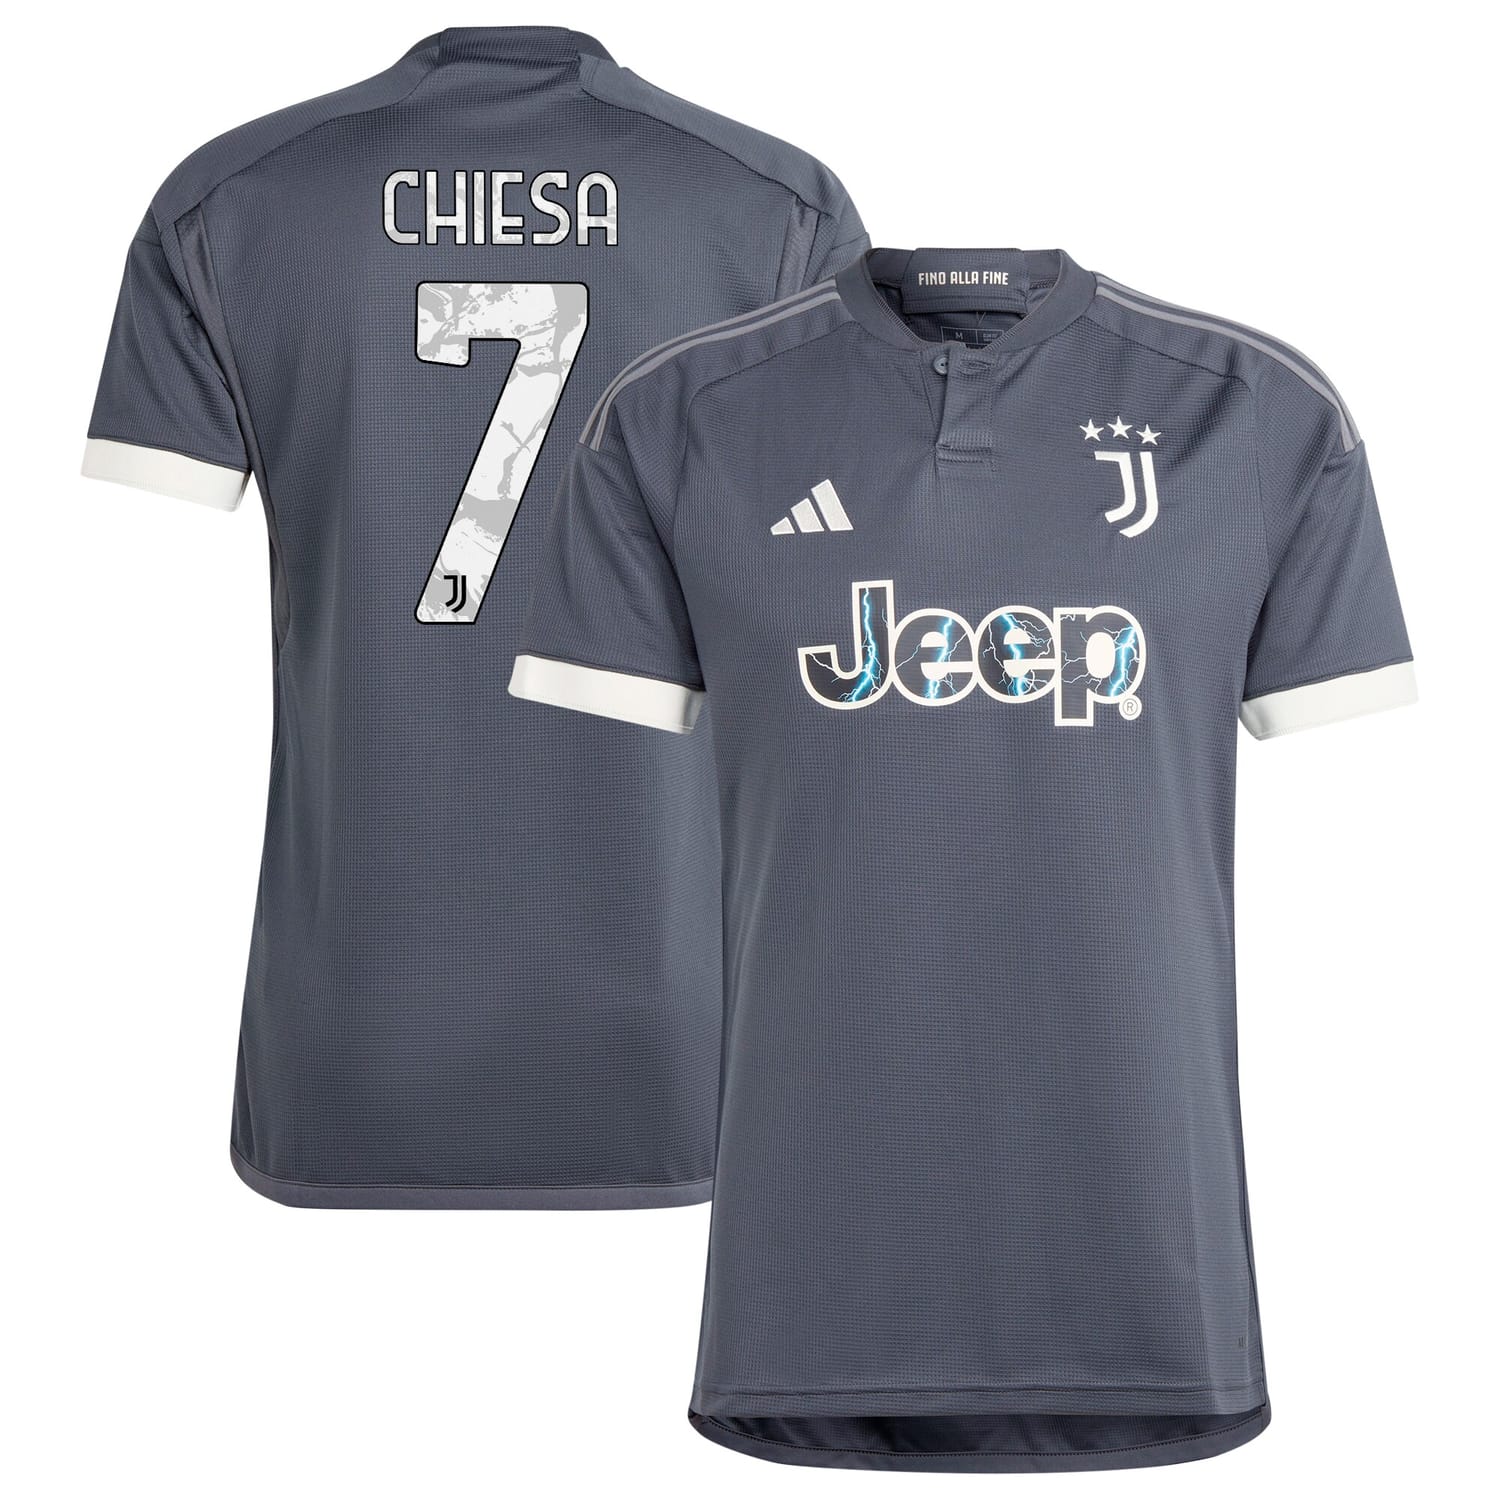 Serie A Juventus Third Jersey Shirt Gray 2023-24 player Federico Chiesa printing for Men